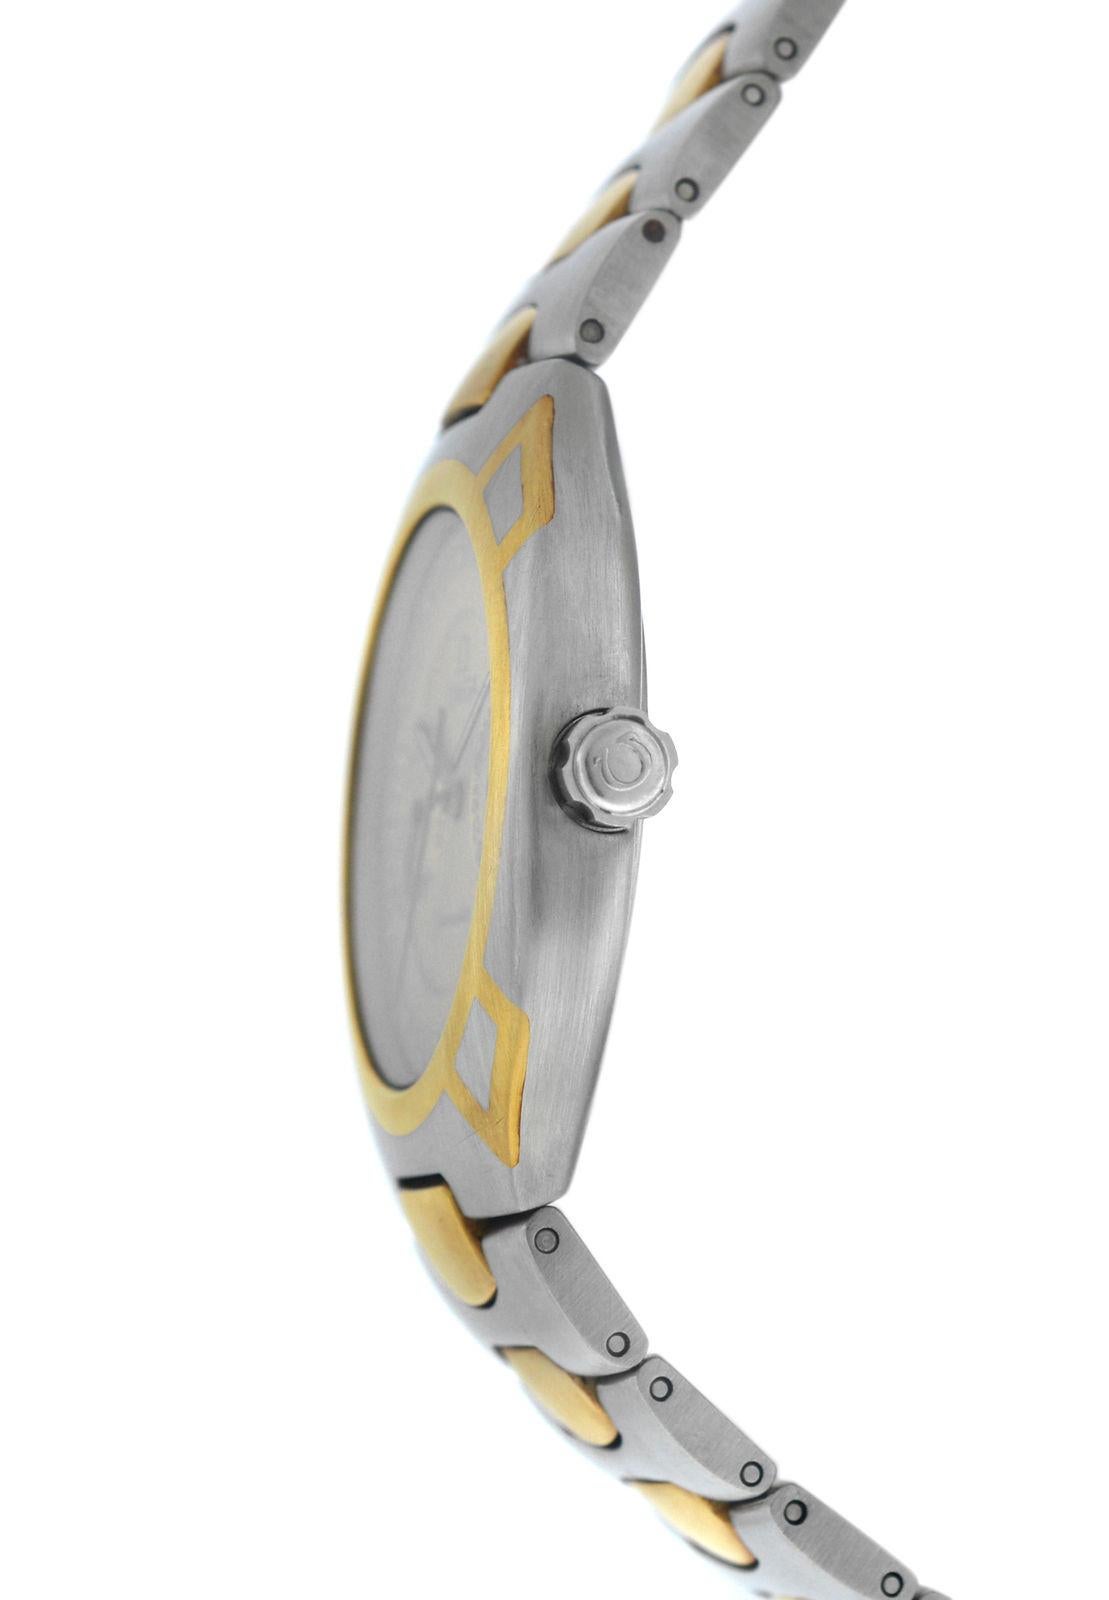 Brand	Omega
Model	Seamaster Polaris 
Gender	Mens Unisex
Condition	Pre-owned
Movement	Swiss Quartz
Case Material	Stainless Steel & Yellow Gold
Bracelet / Strap Material	
Stainless Steel & Yellow Gold

Clasp / Buckle Material	
Stainless Steel

Clasp